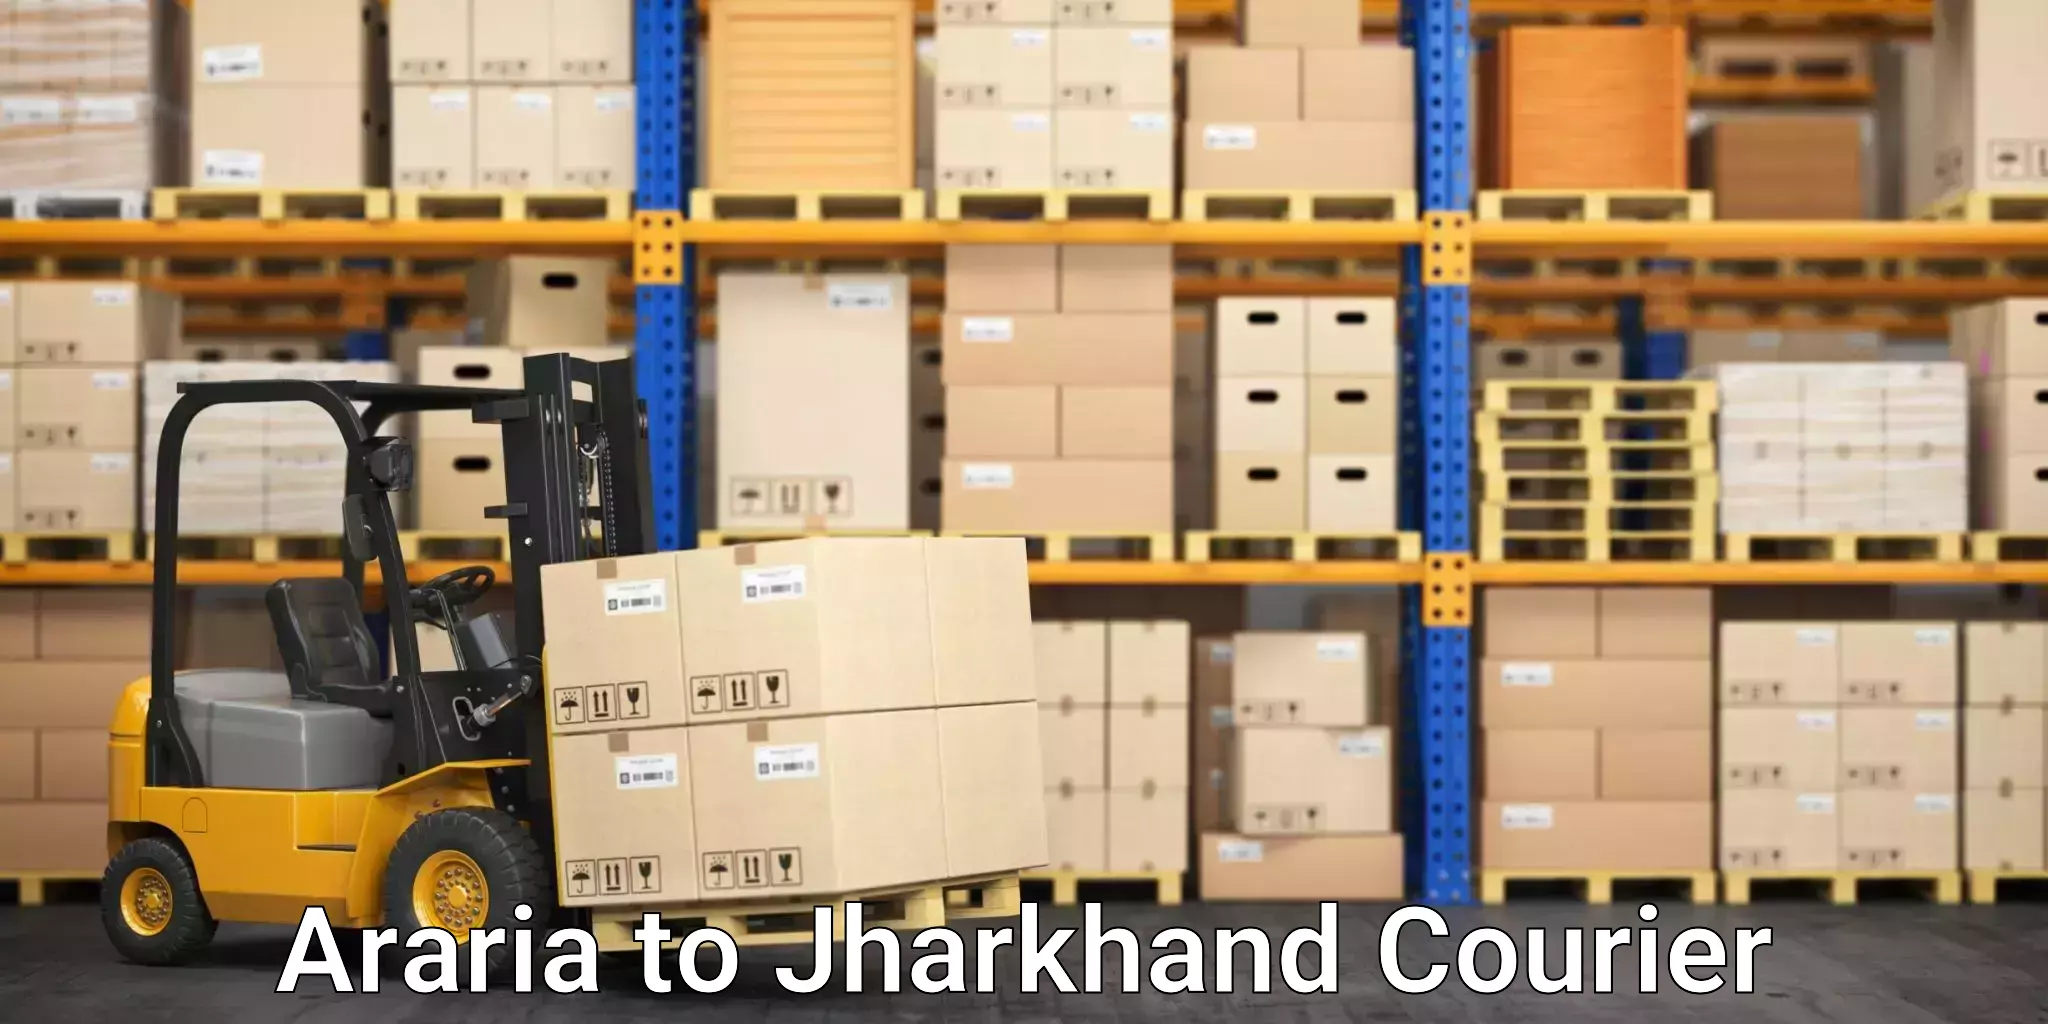 Reliable movers in Araria to Jharkhand